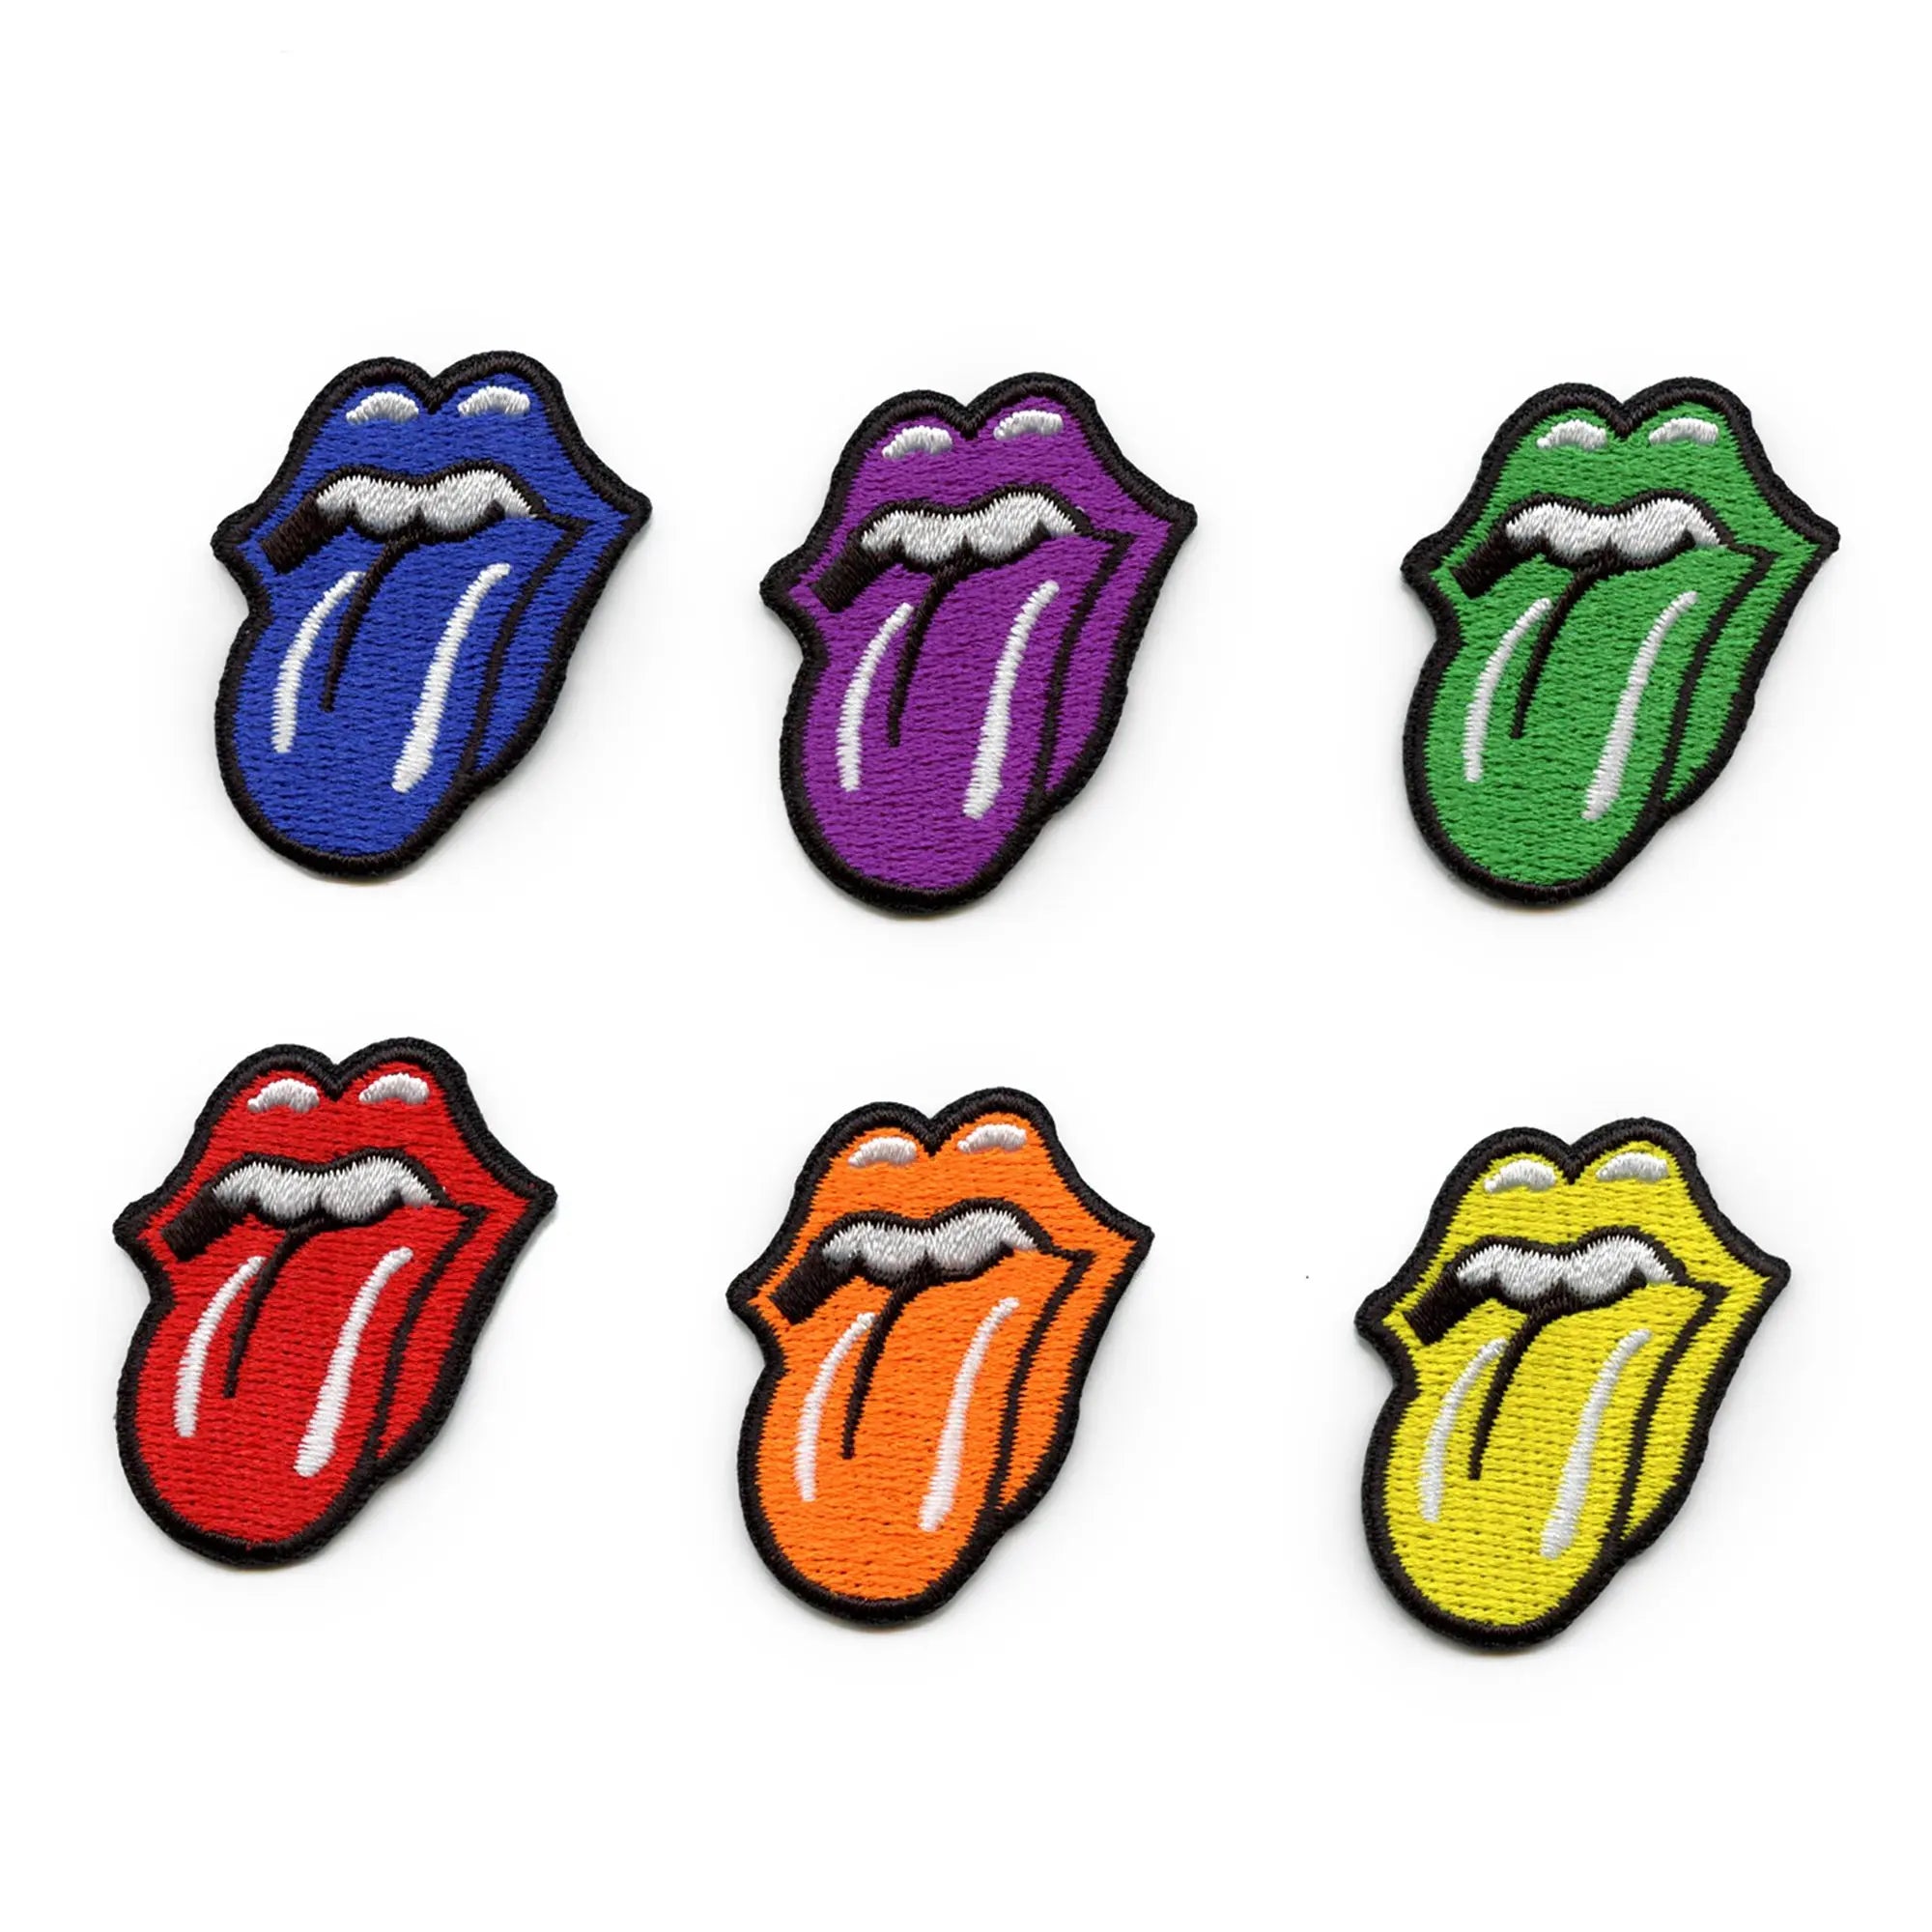 The Rolling Stones Patch - Classic Tongue BL Standard Patch